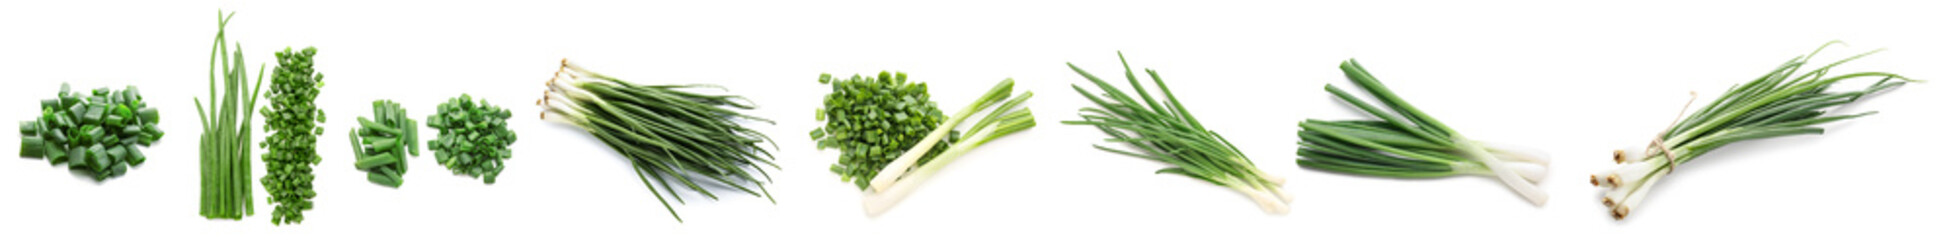 Set of fresh green onion isolated on white